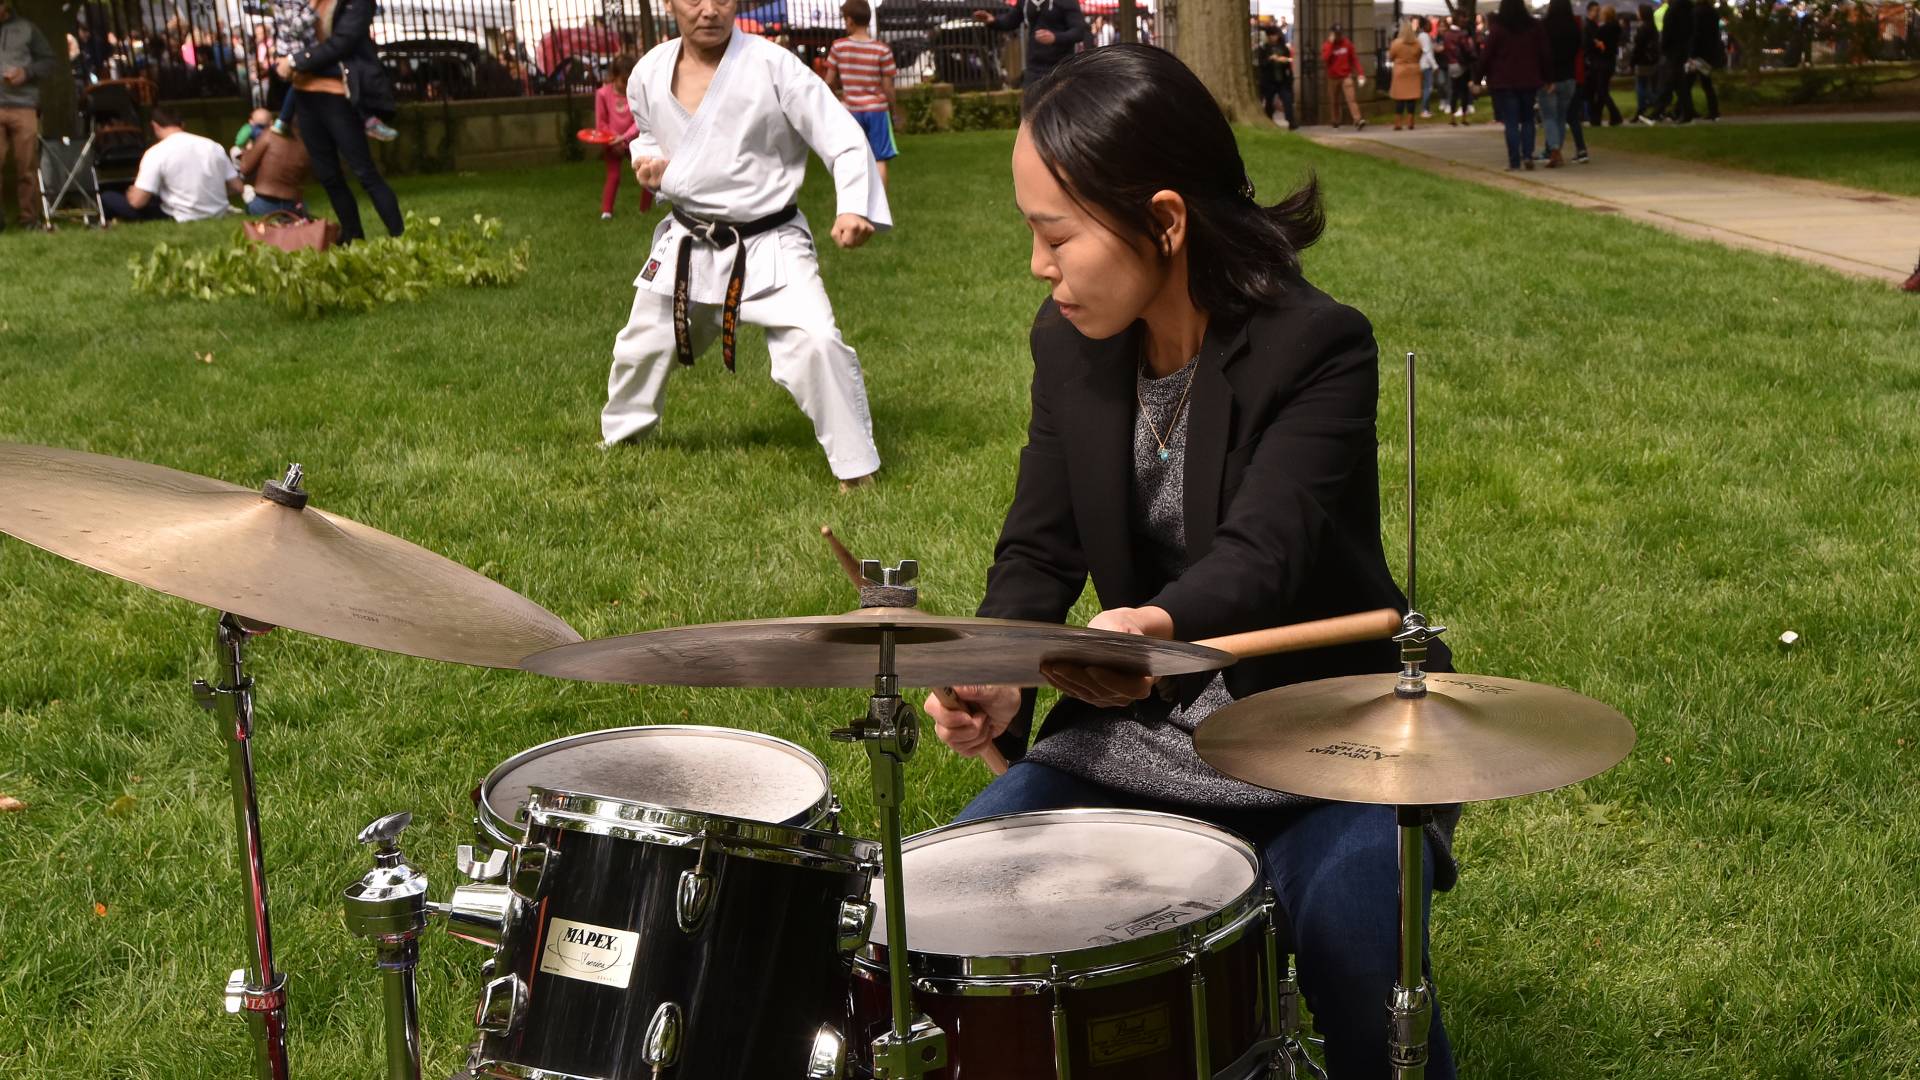 A man demonstrates martial arts while a woman drums